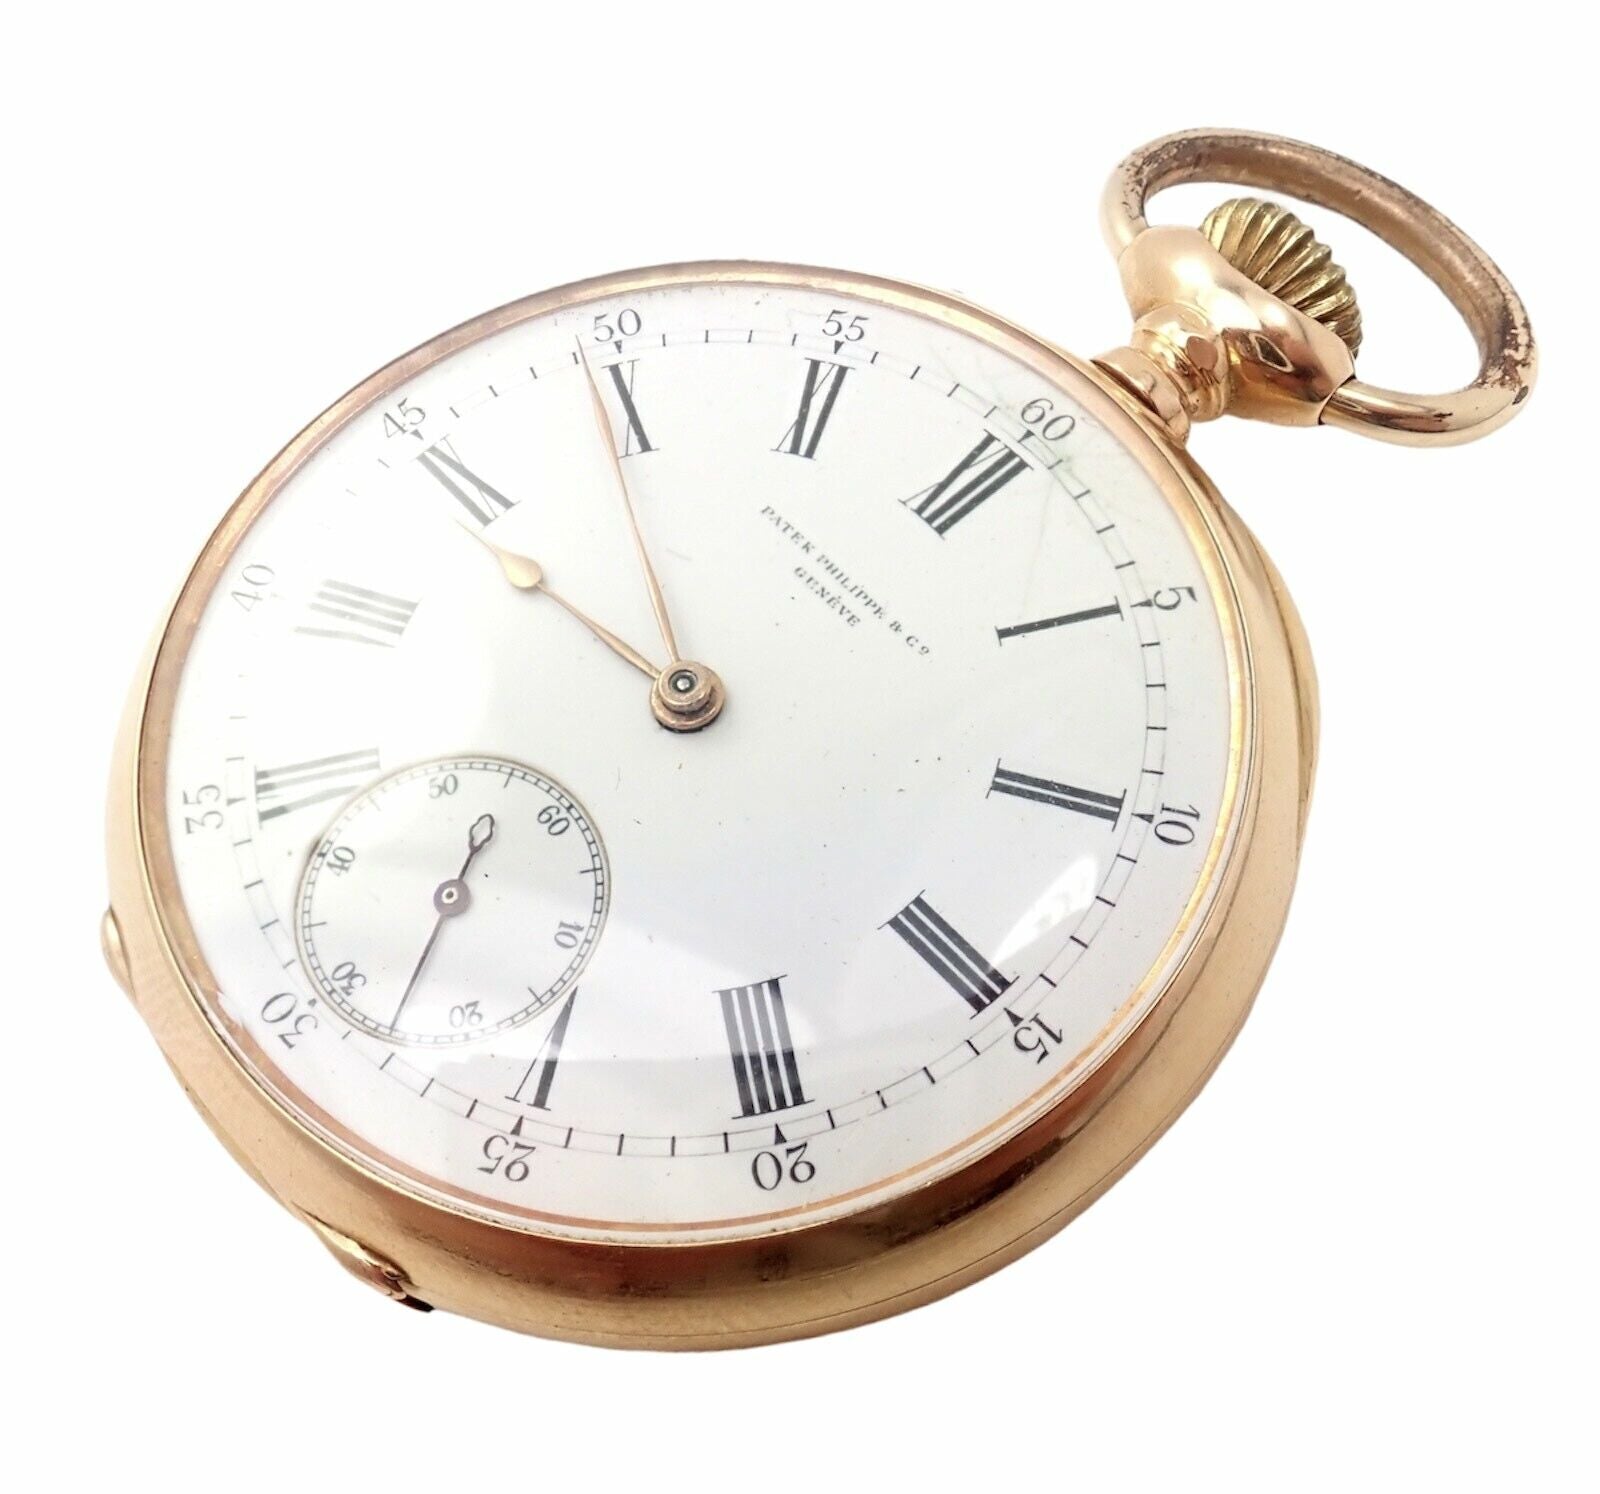 Patek Philippe Jewelry & Watches:Watches, Parts & Accessories:Watches:Pocket Watches Rare! Patek Philippe 18k Yellow Gold Triple Signed 20s Pocket Watch c. 1890's